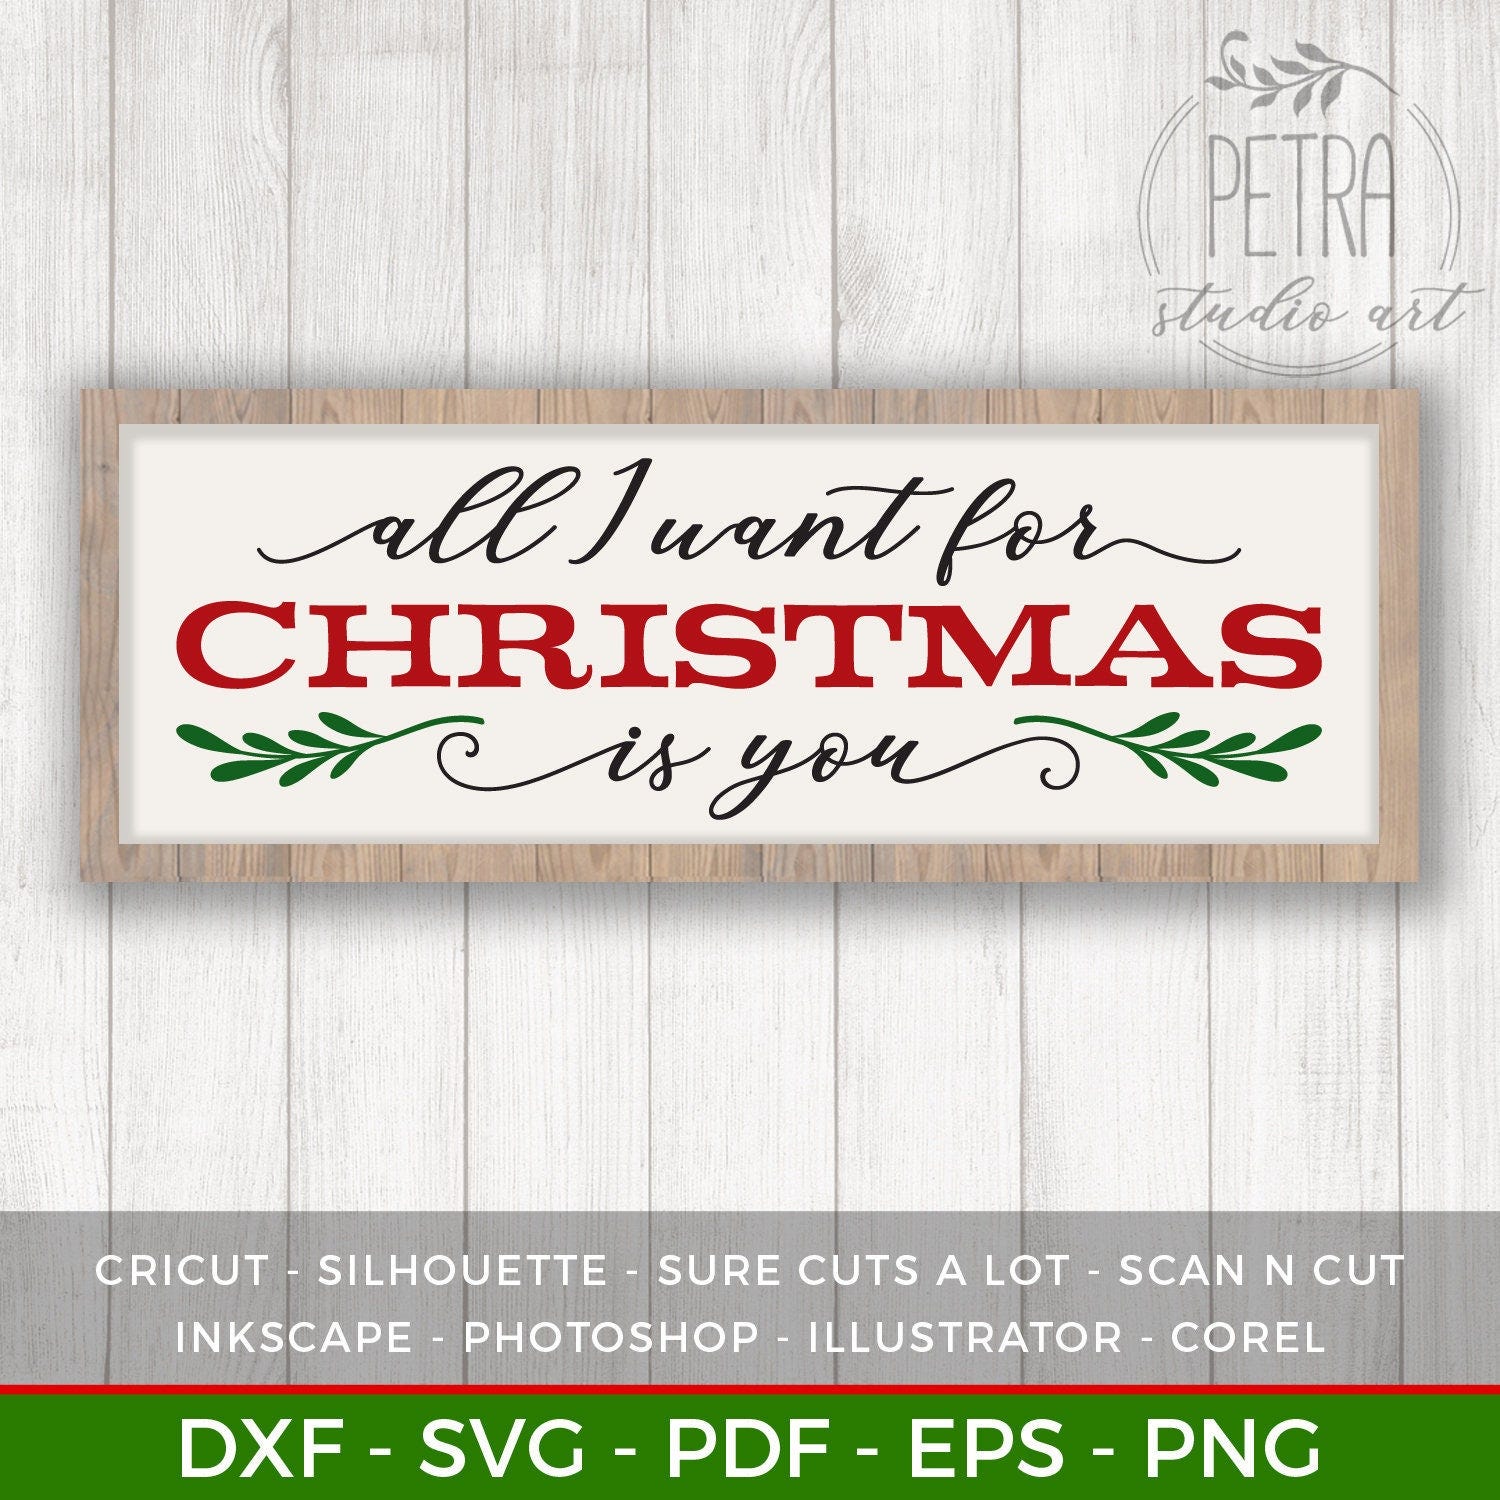 All I Want for Christmas is You Svg Cut File for Rustic Christmas Home Decor and Farmhouse Wall Sign. Personal and small business use.